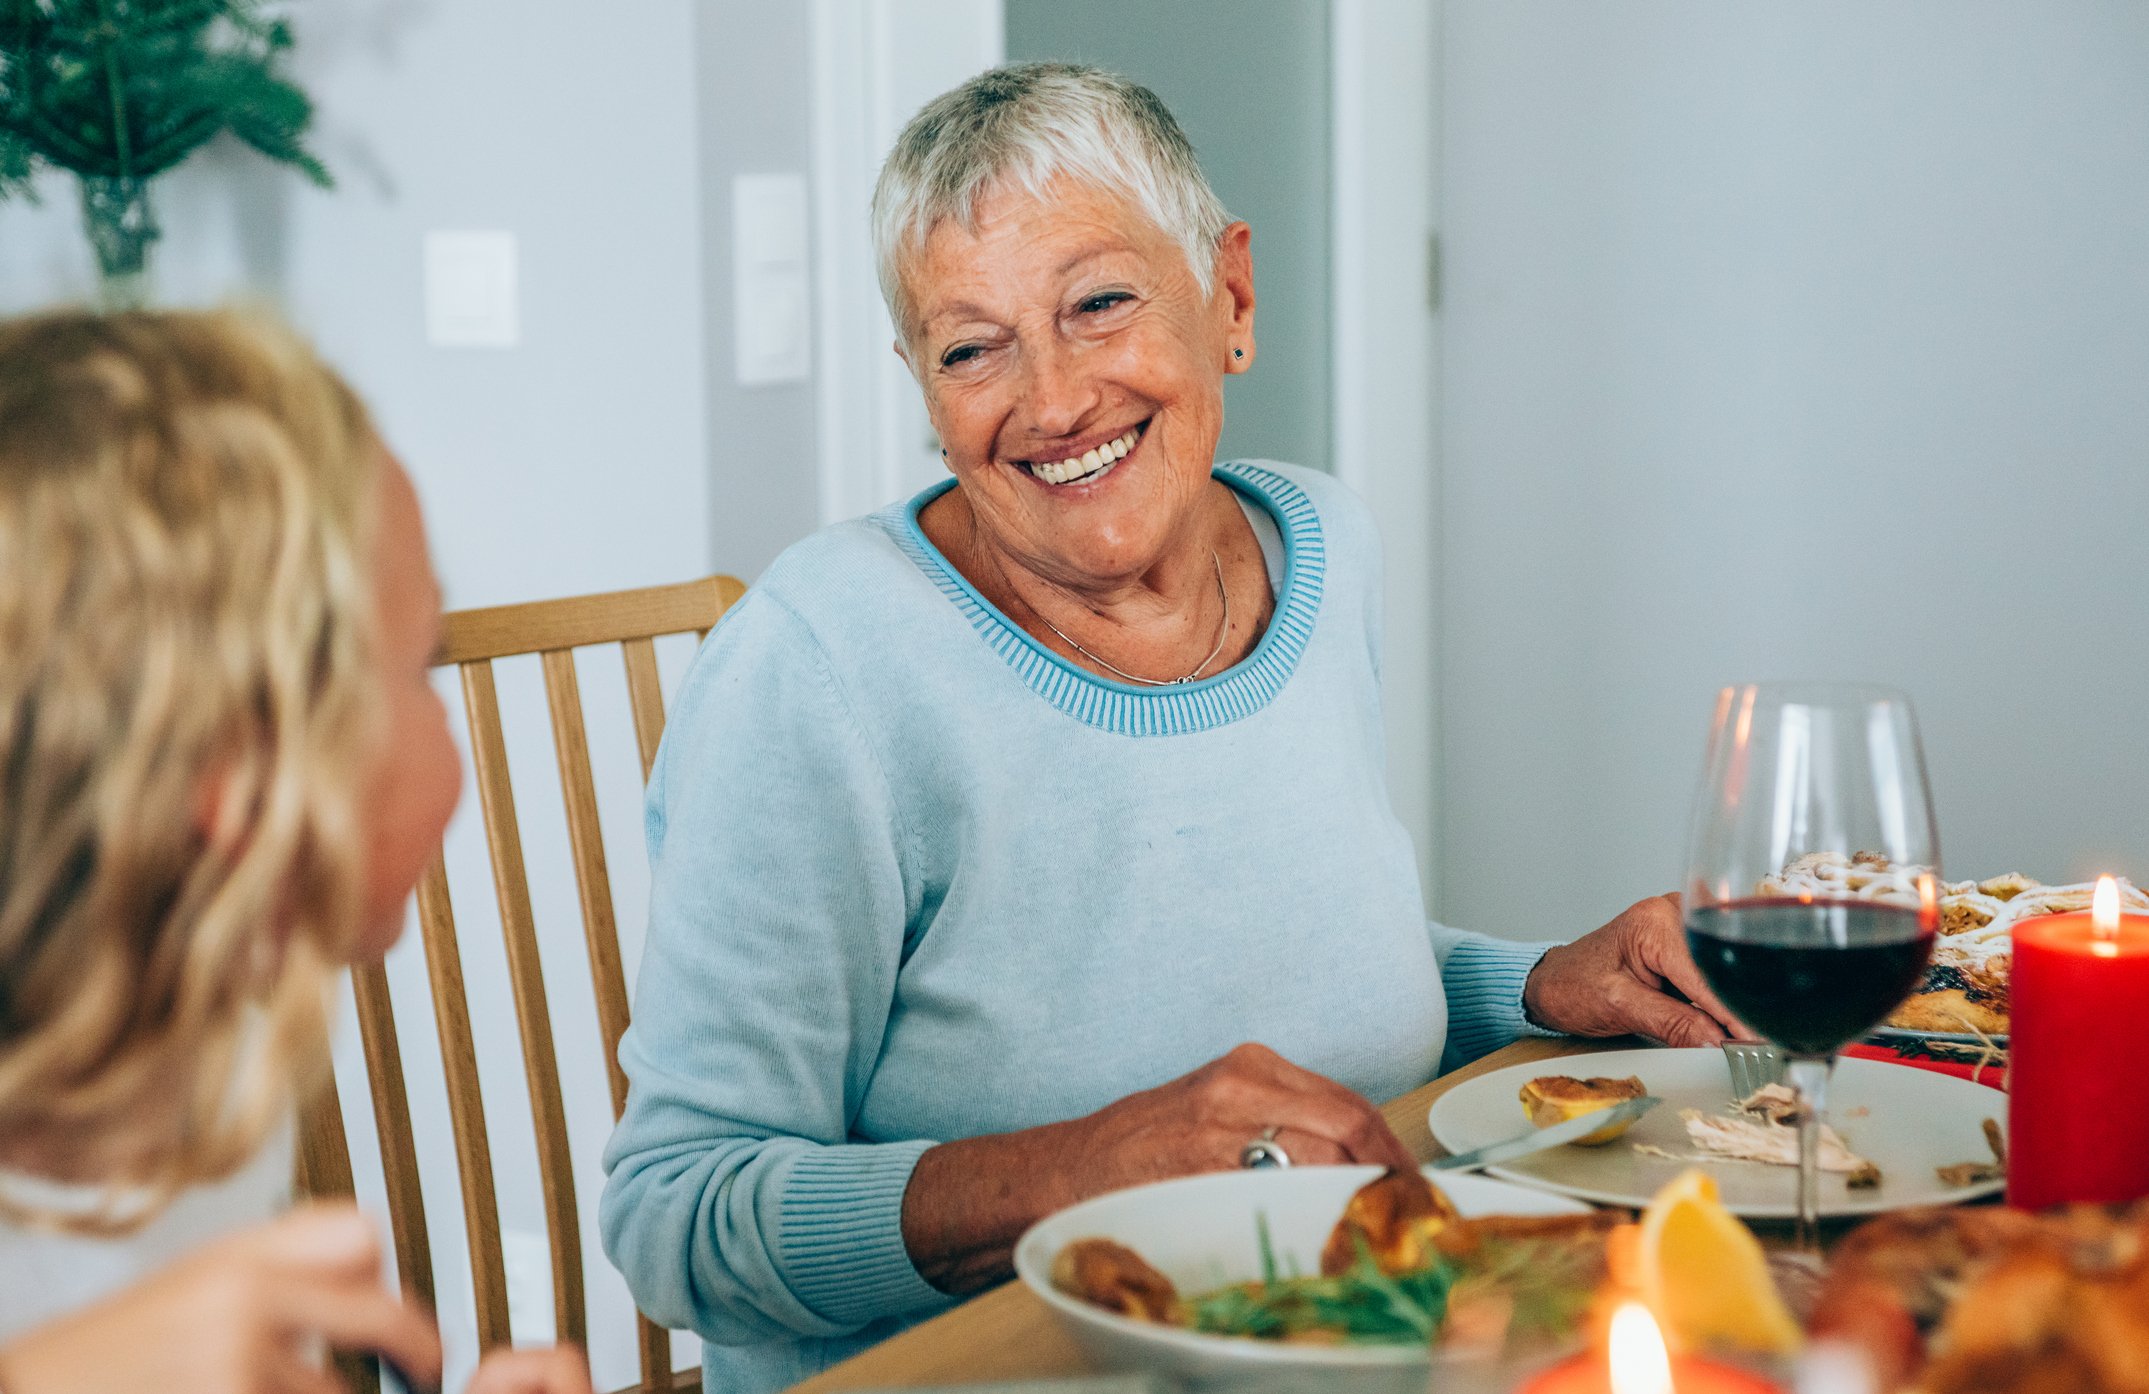 Photo of smiling senior woman during holiday dinner | Photo: Getty Images